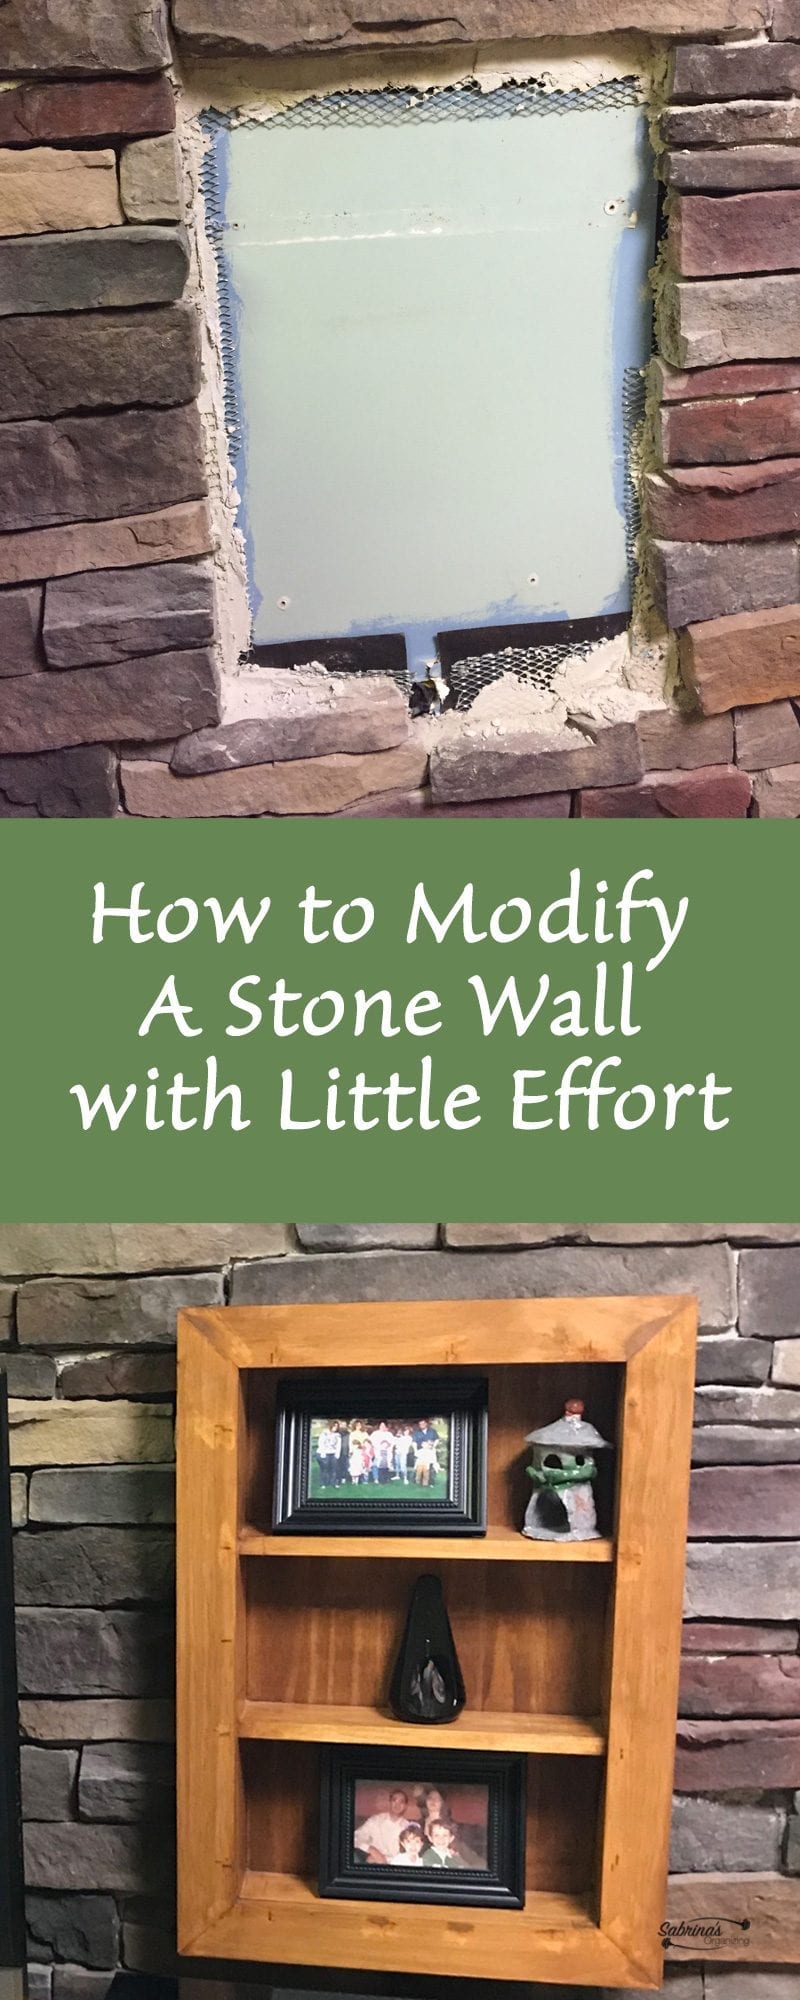 How to modify a stone wall with little effort